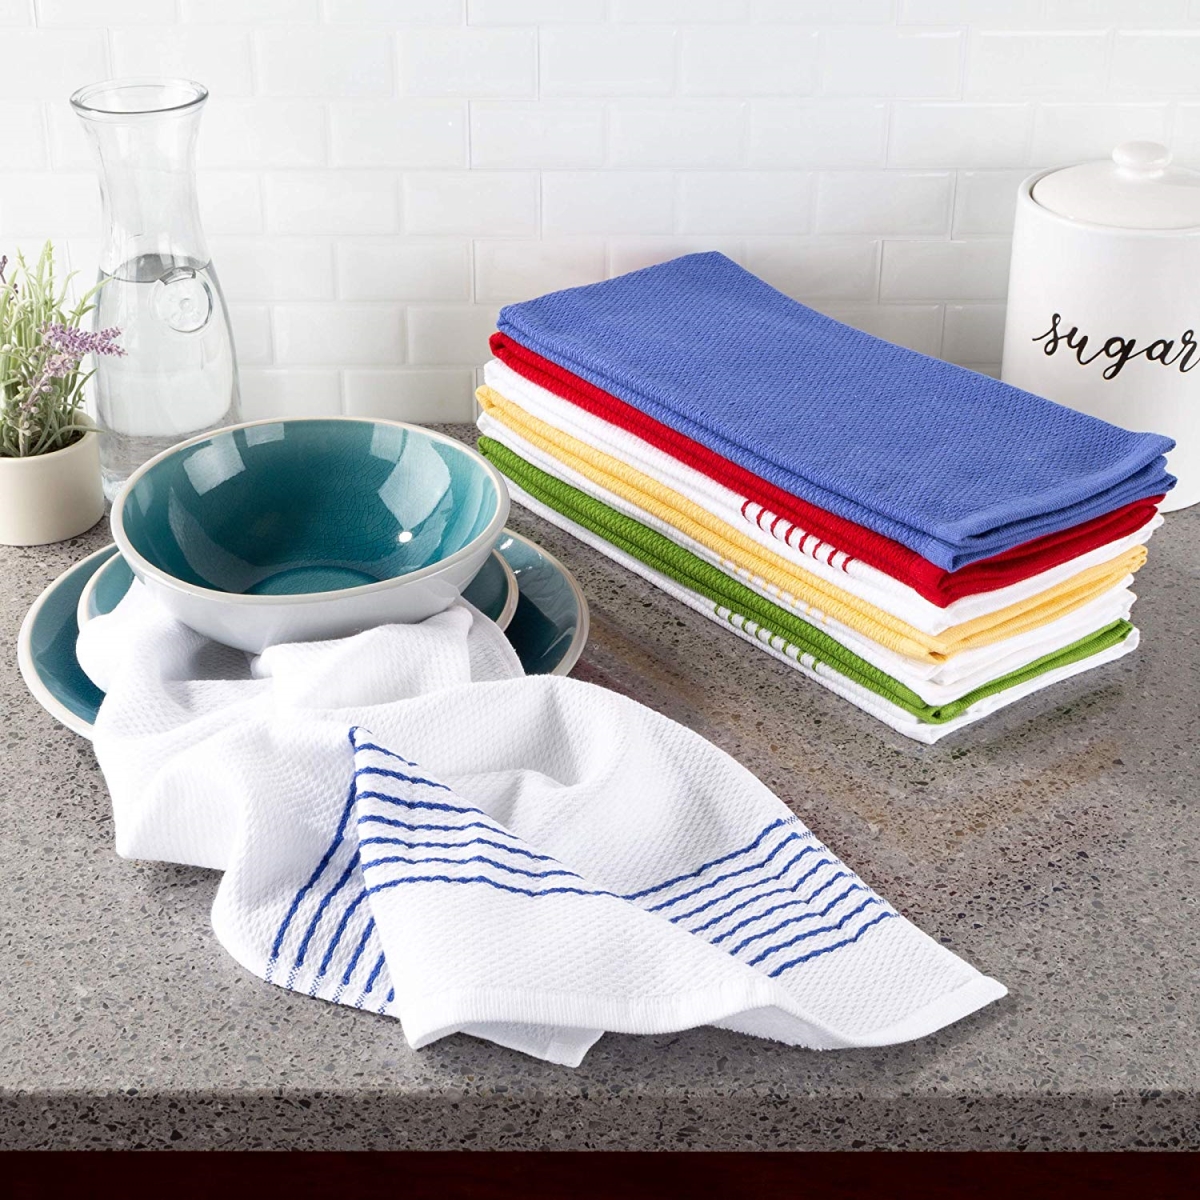 69a-39291 16 X 28 In. Home Kitchen Towels, Multi-color - Set Of 8